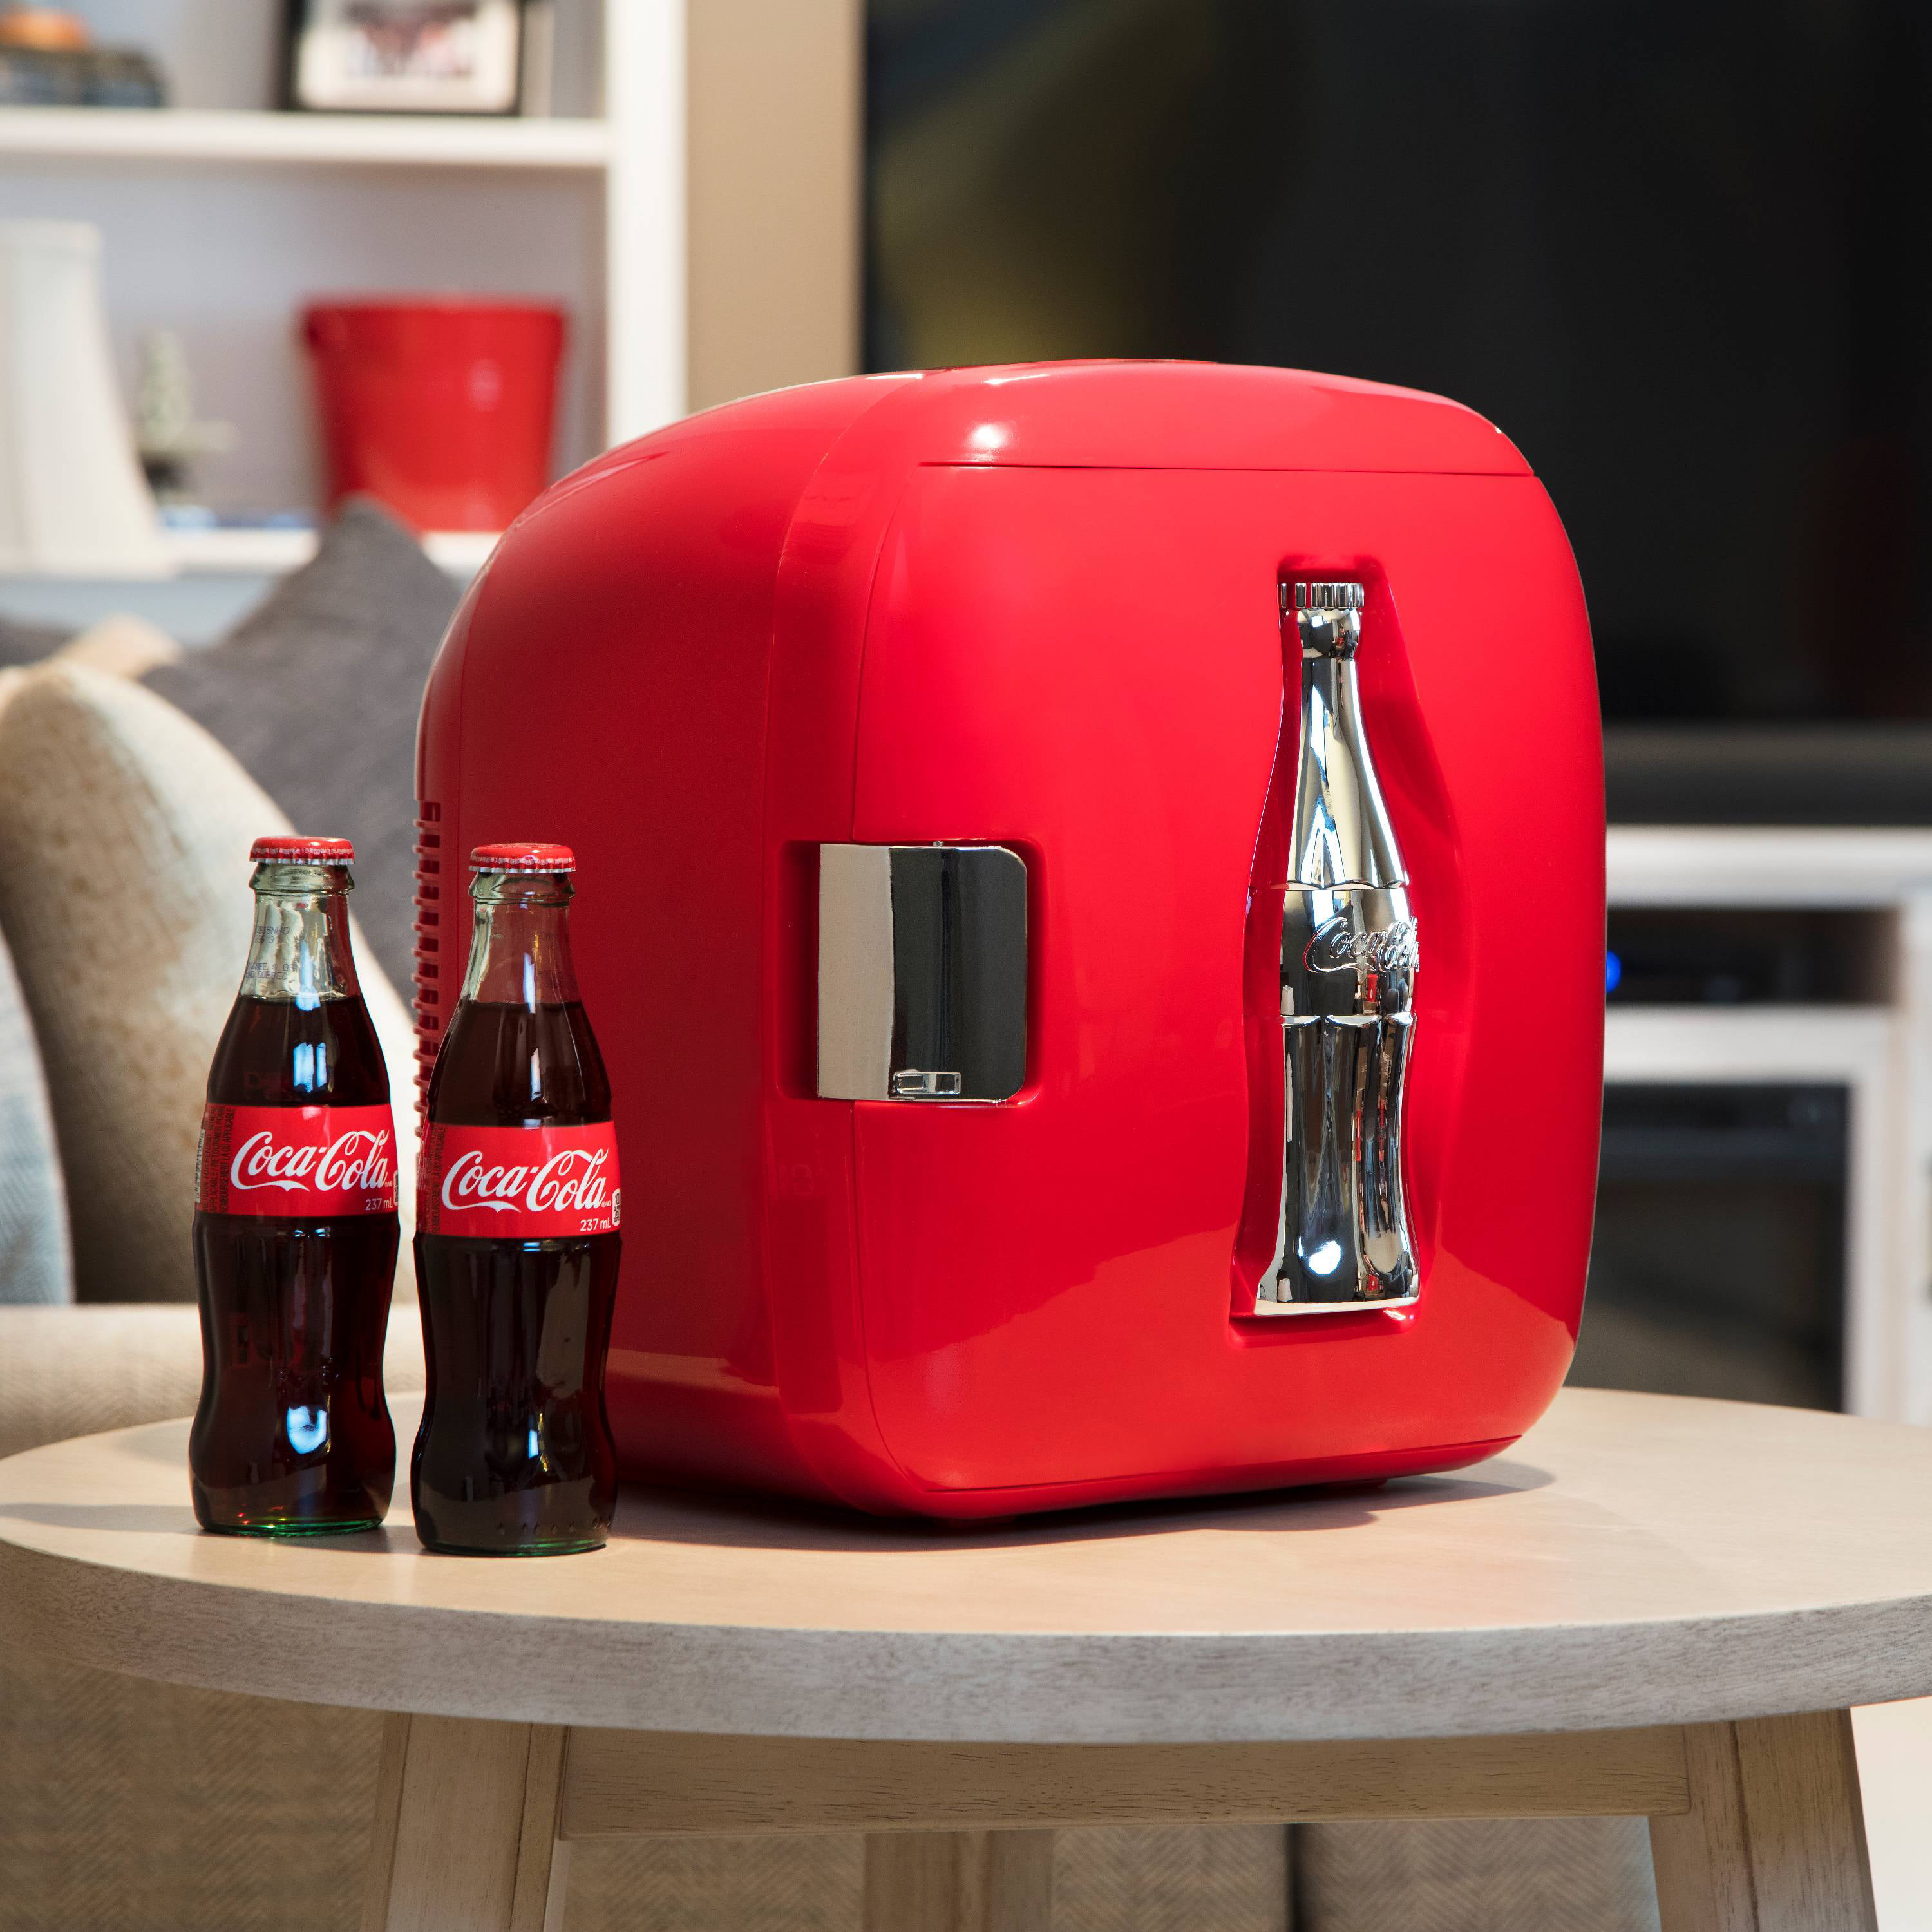 CocaCola 12 can Portable Compact Electric Beverage Cooler Fridges,Red 59586600579 eBay